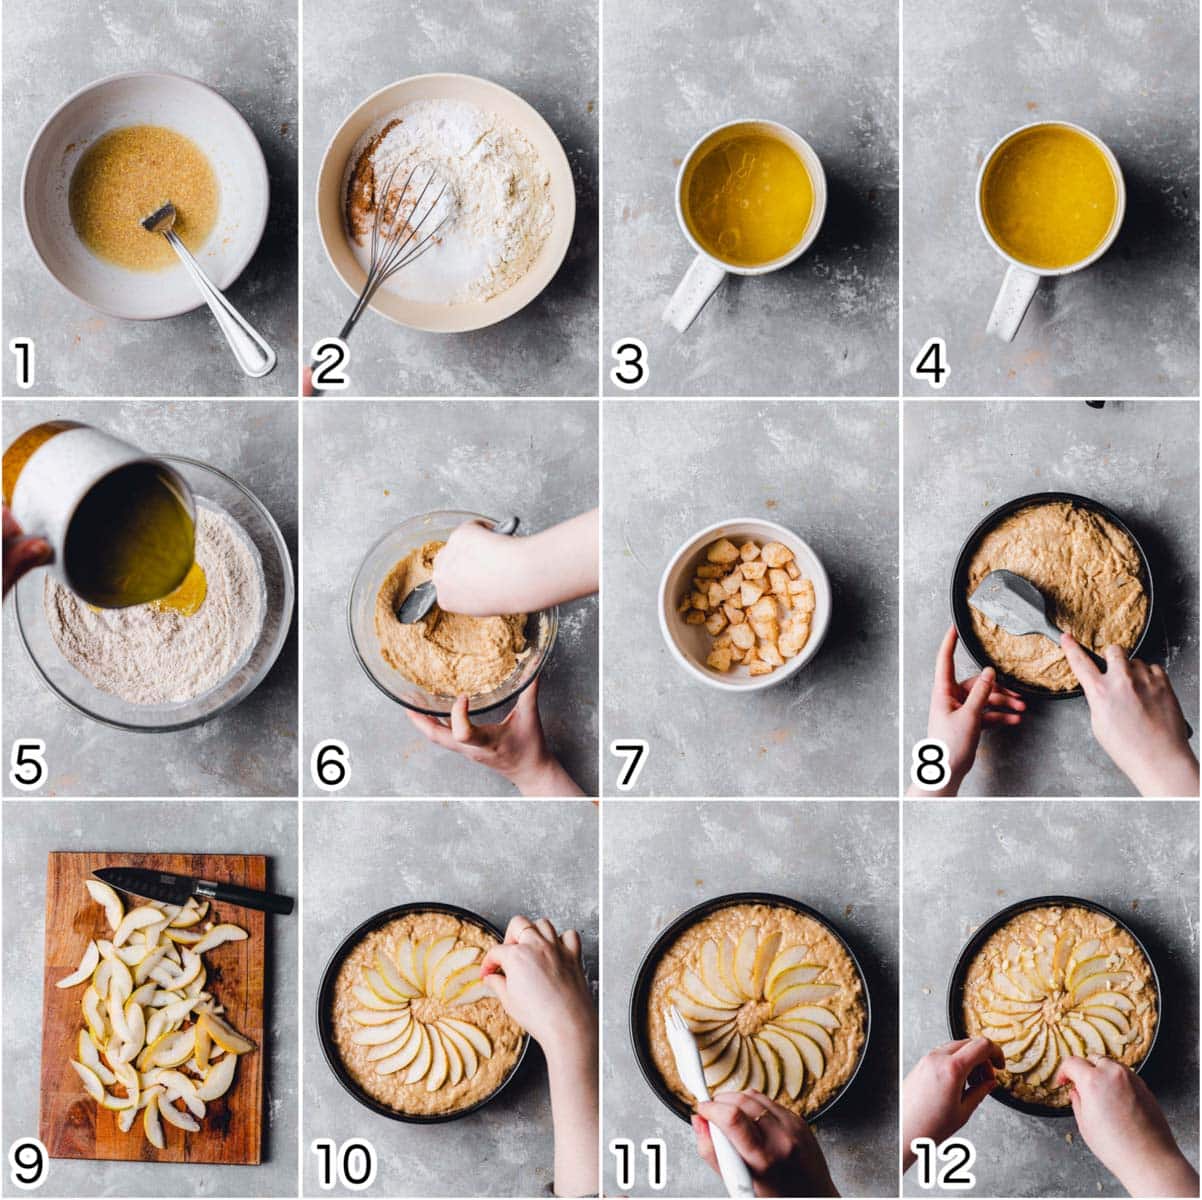 A collage of 12 images showing all the steps in making a cake. 